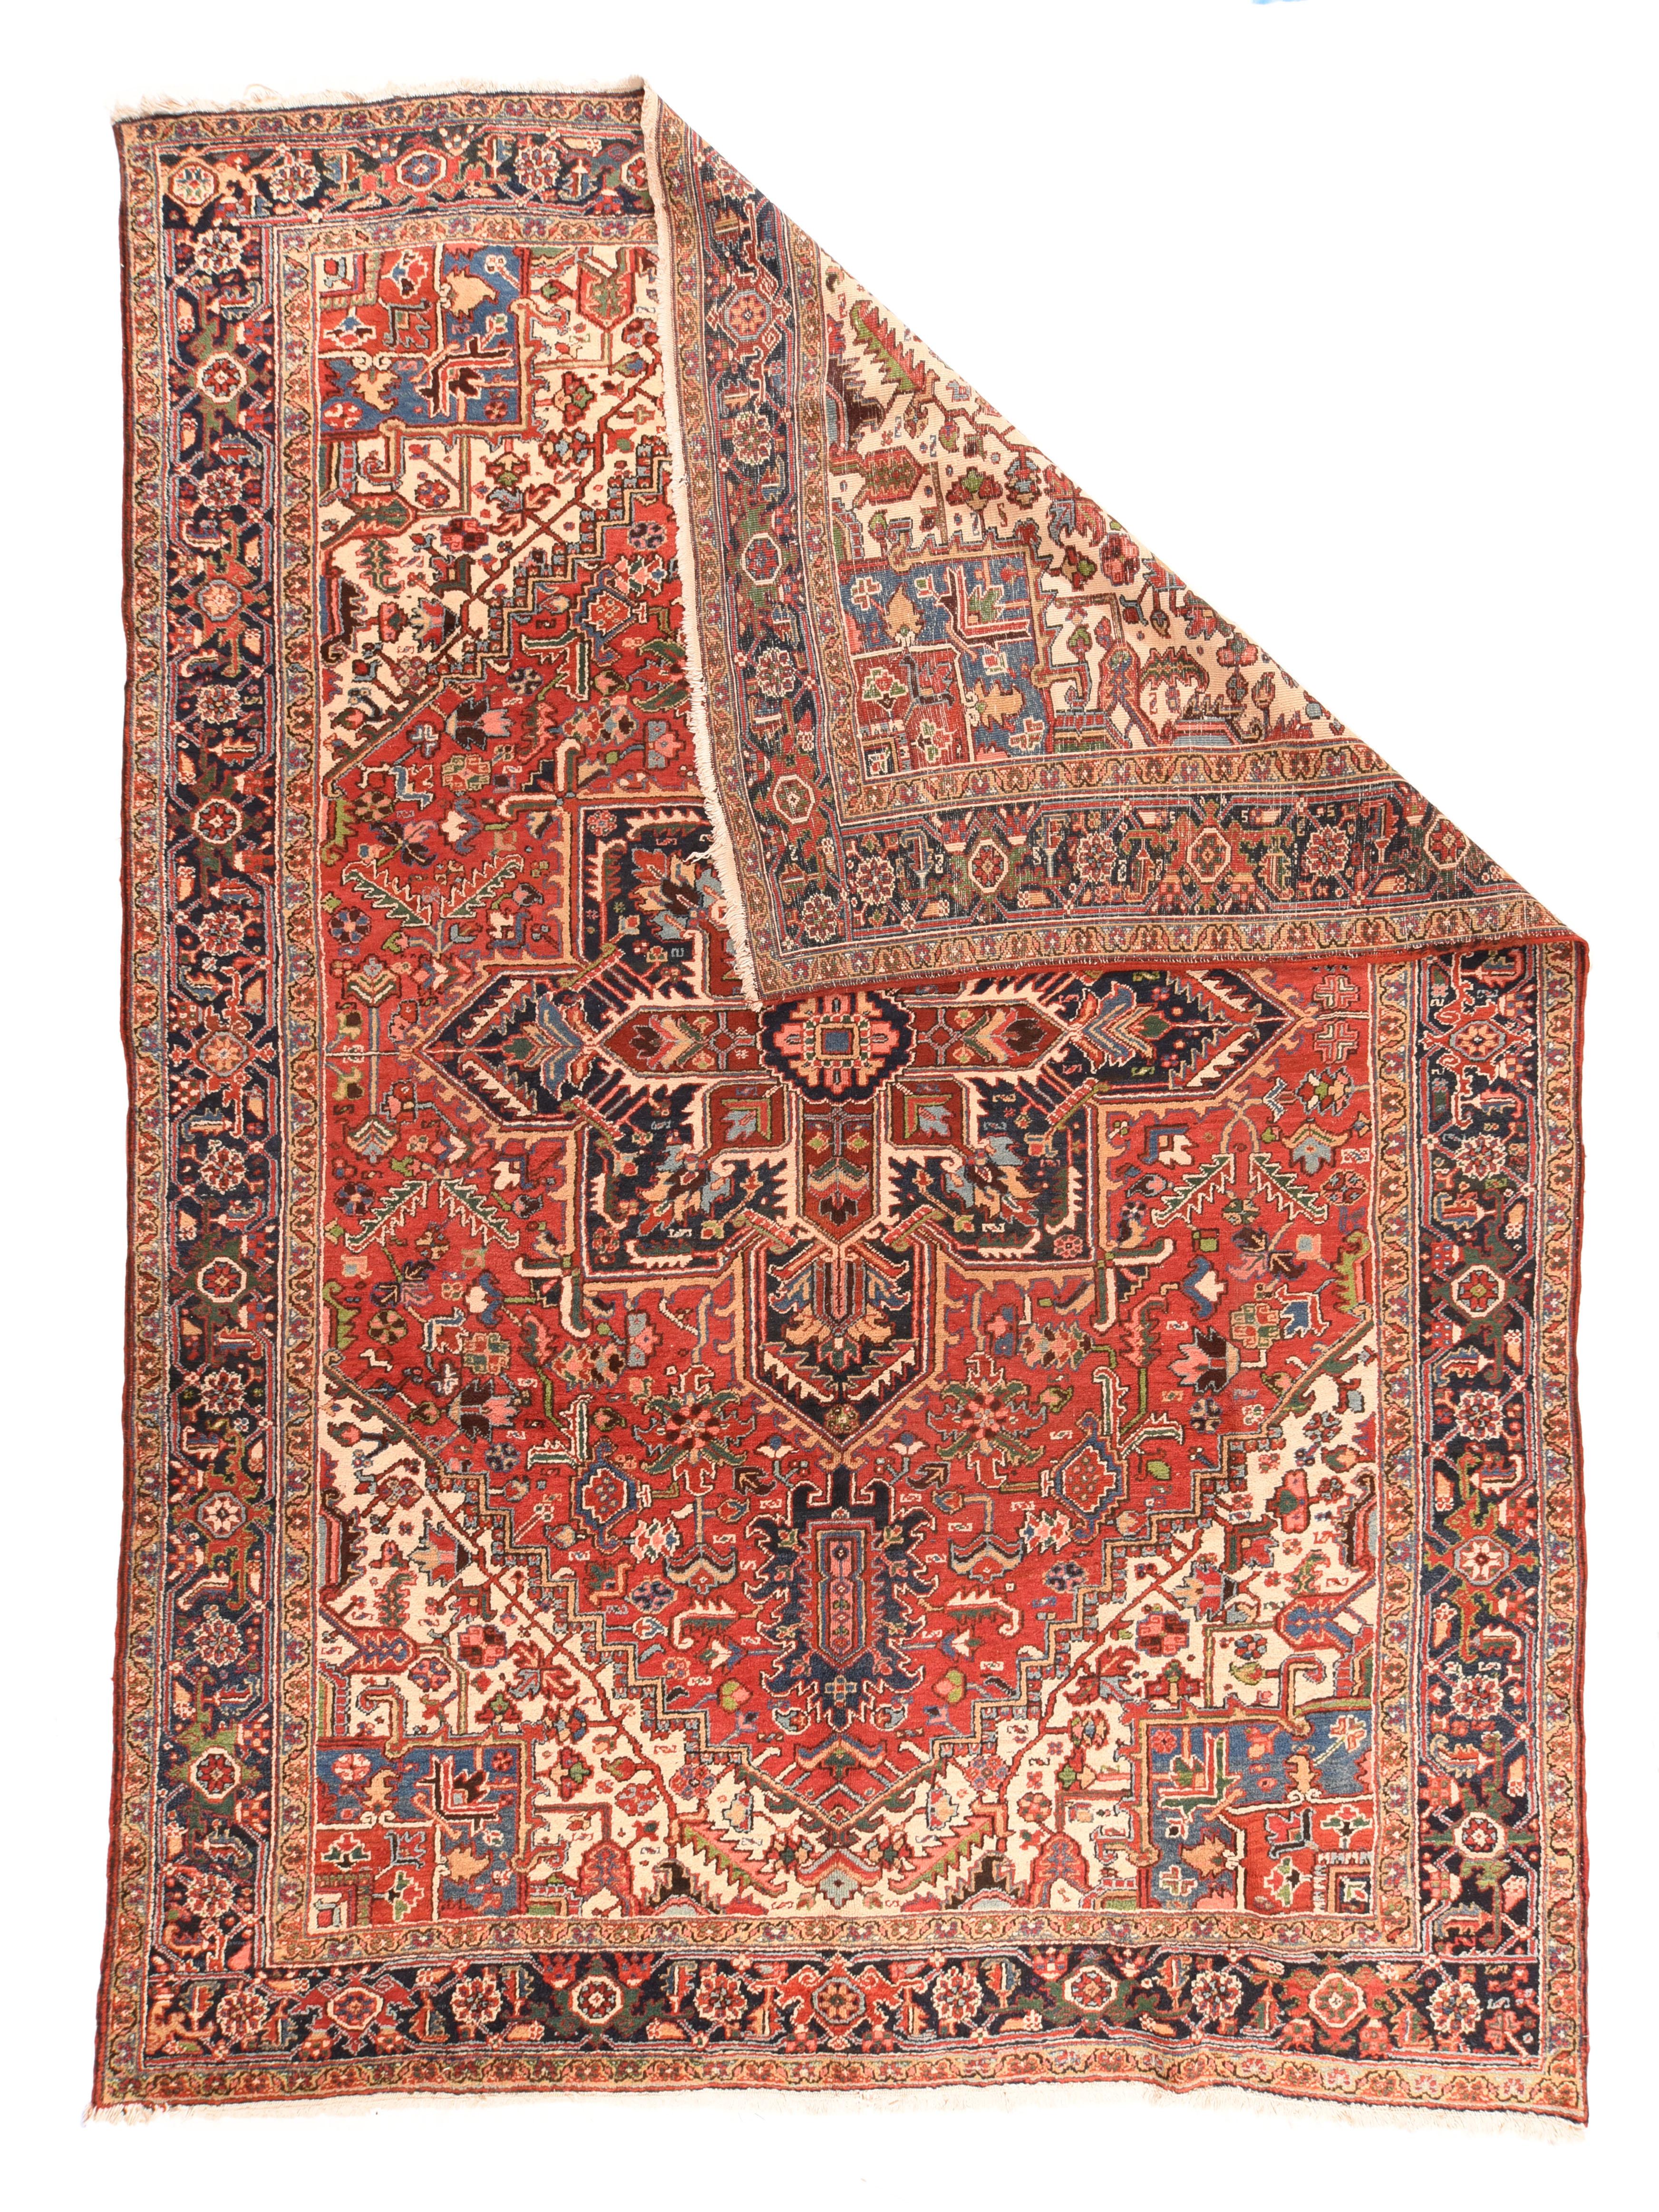 Antique Heriz rug measures: 9'3'' x 12'3''. This characteristic and beautiful NW Persian rustic carpet features an all-natural dye palette with a madder red field anchored by a layered navy and blood red pointed octogramme palmette medallion. The